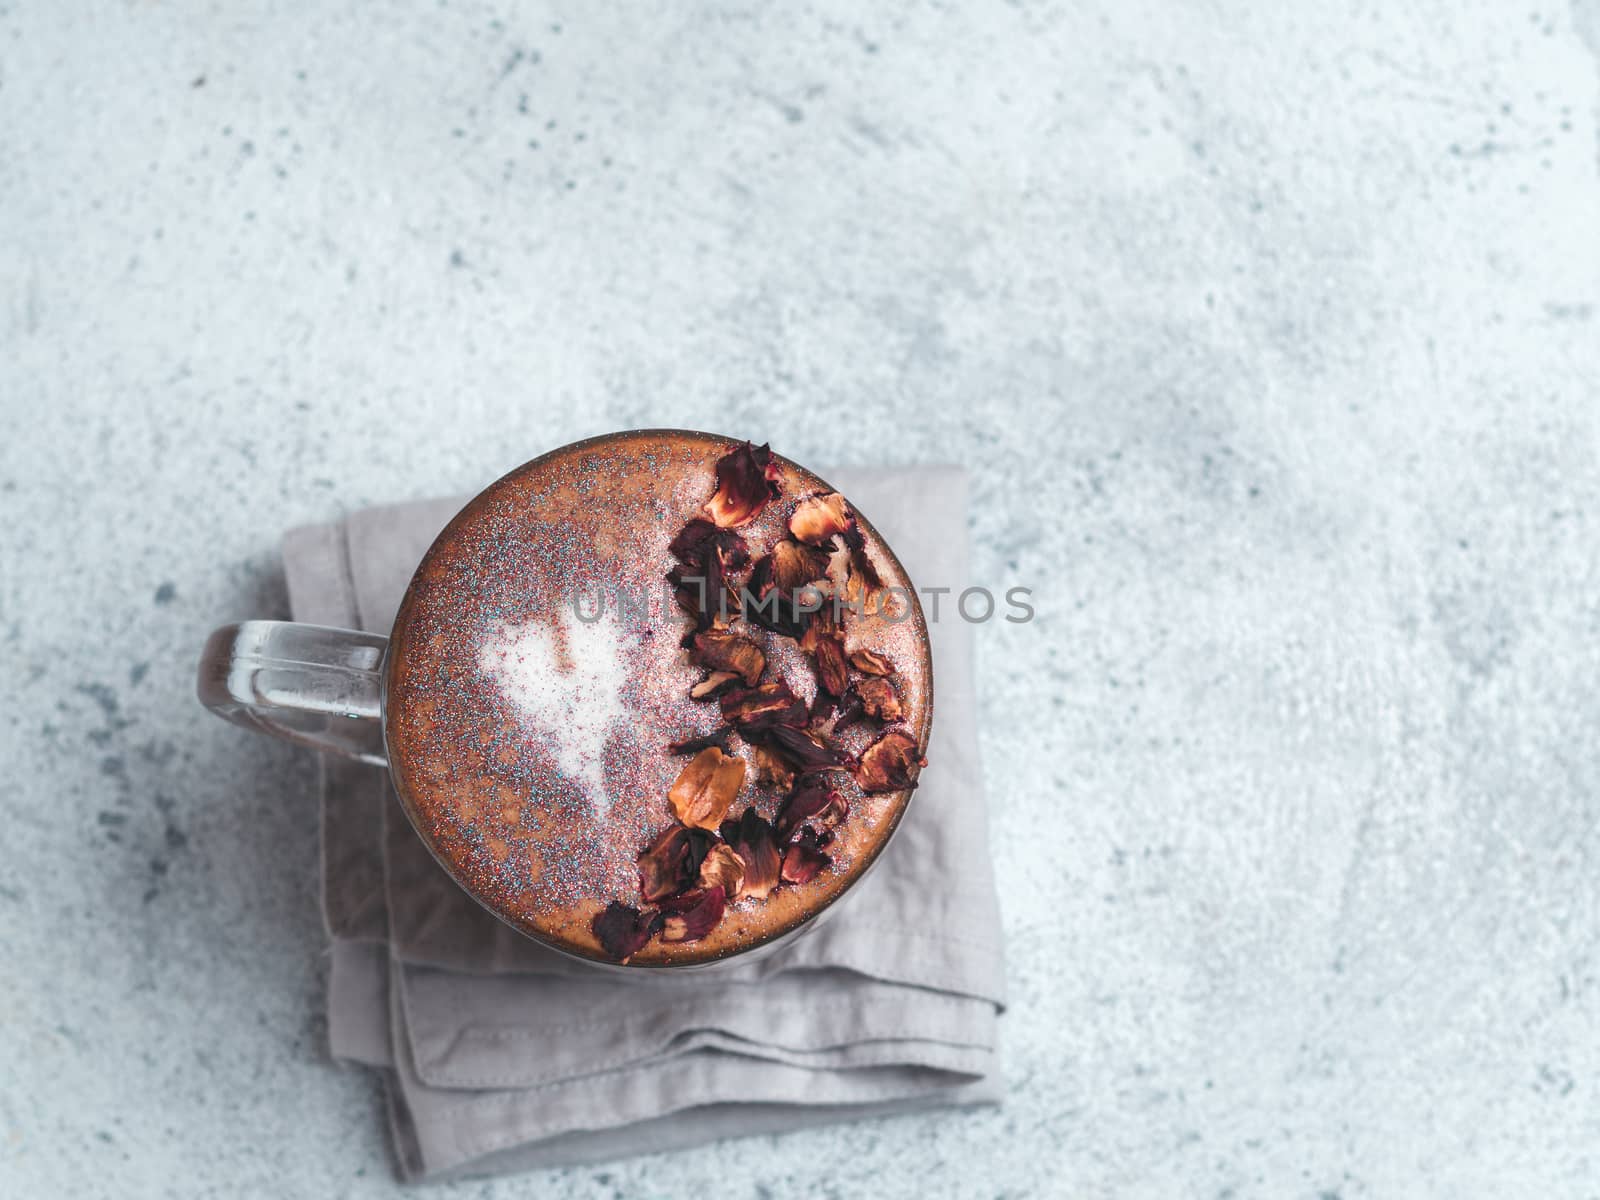 diamond cappuccino coffee with dried rose petals by fascinadora